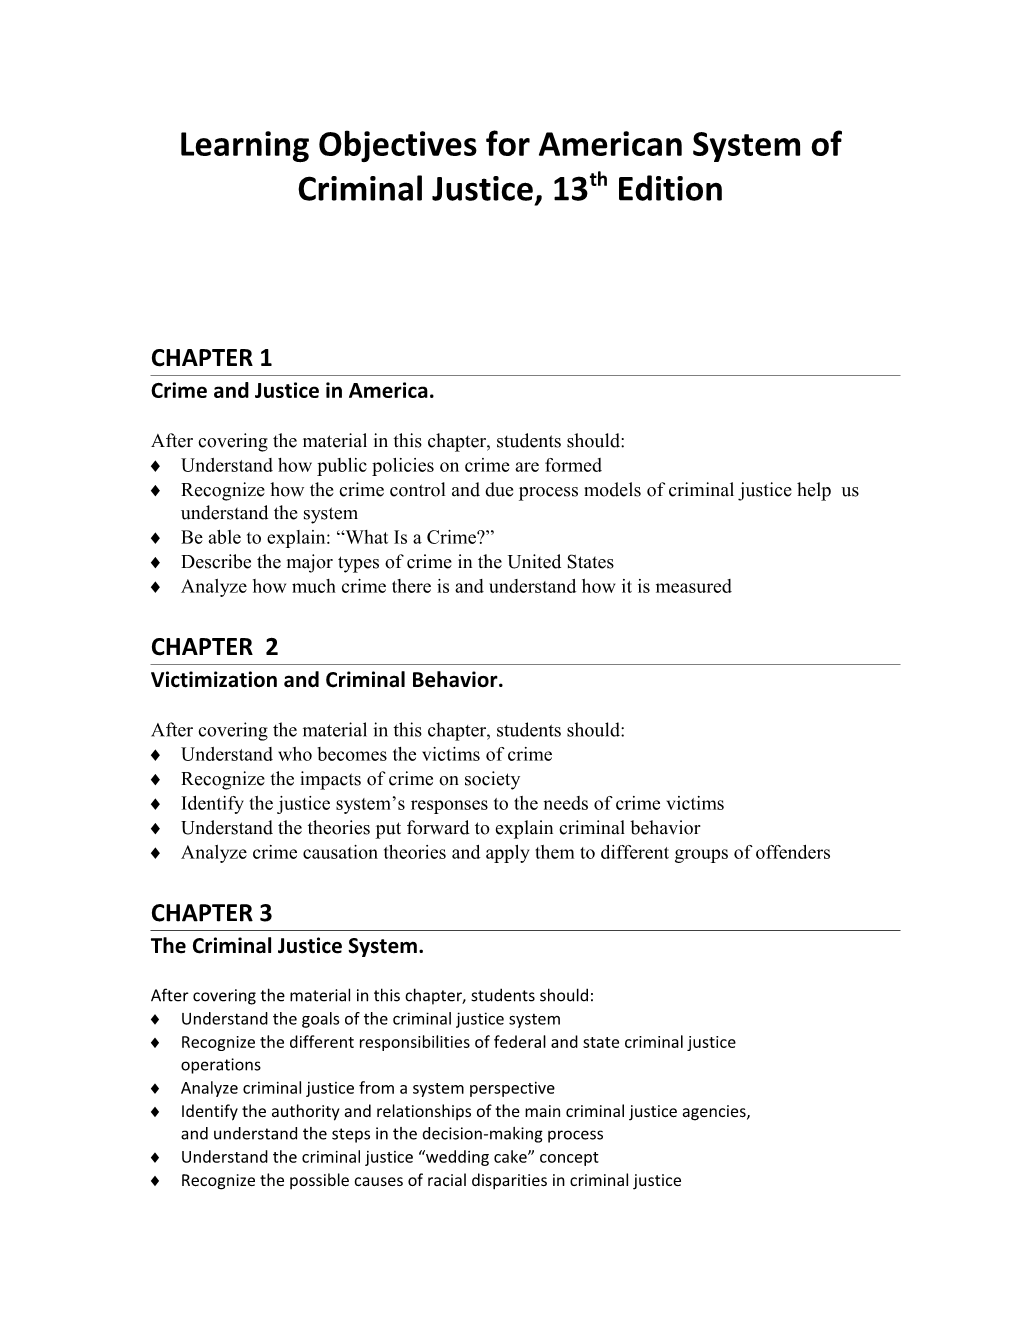 Learning Objectives for American System of Criminal Justice, 13Th Edition